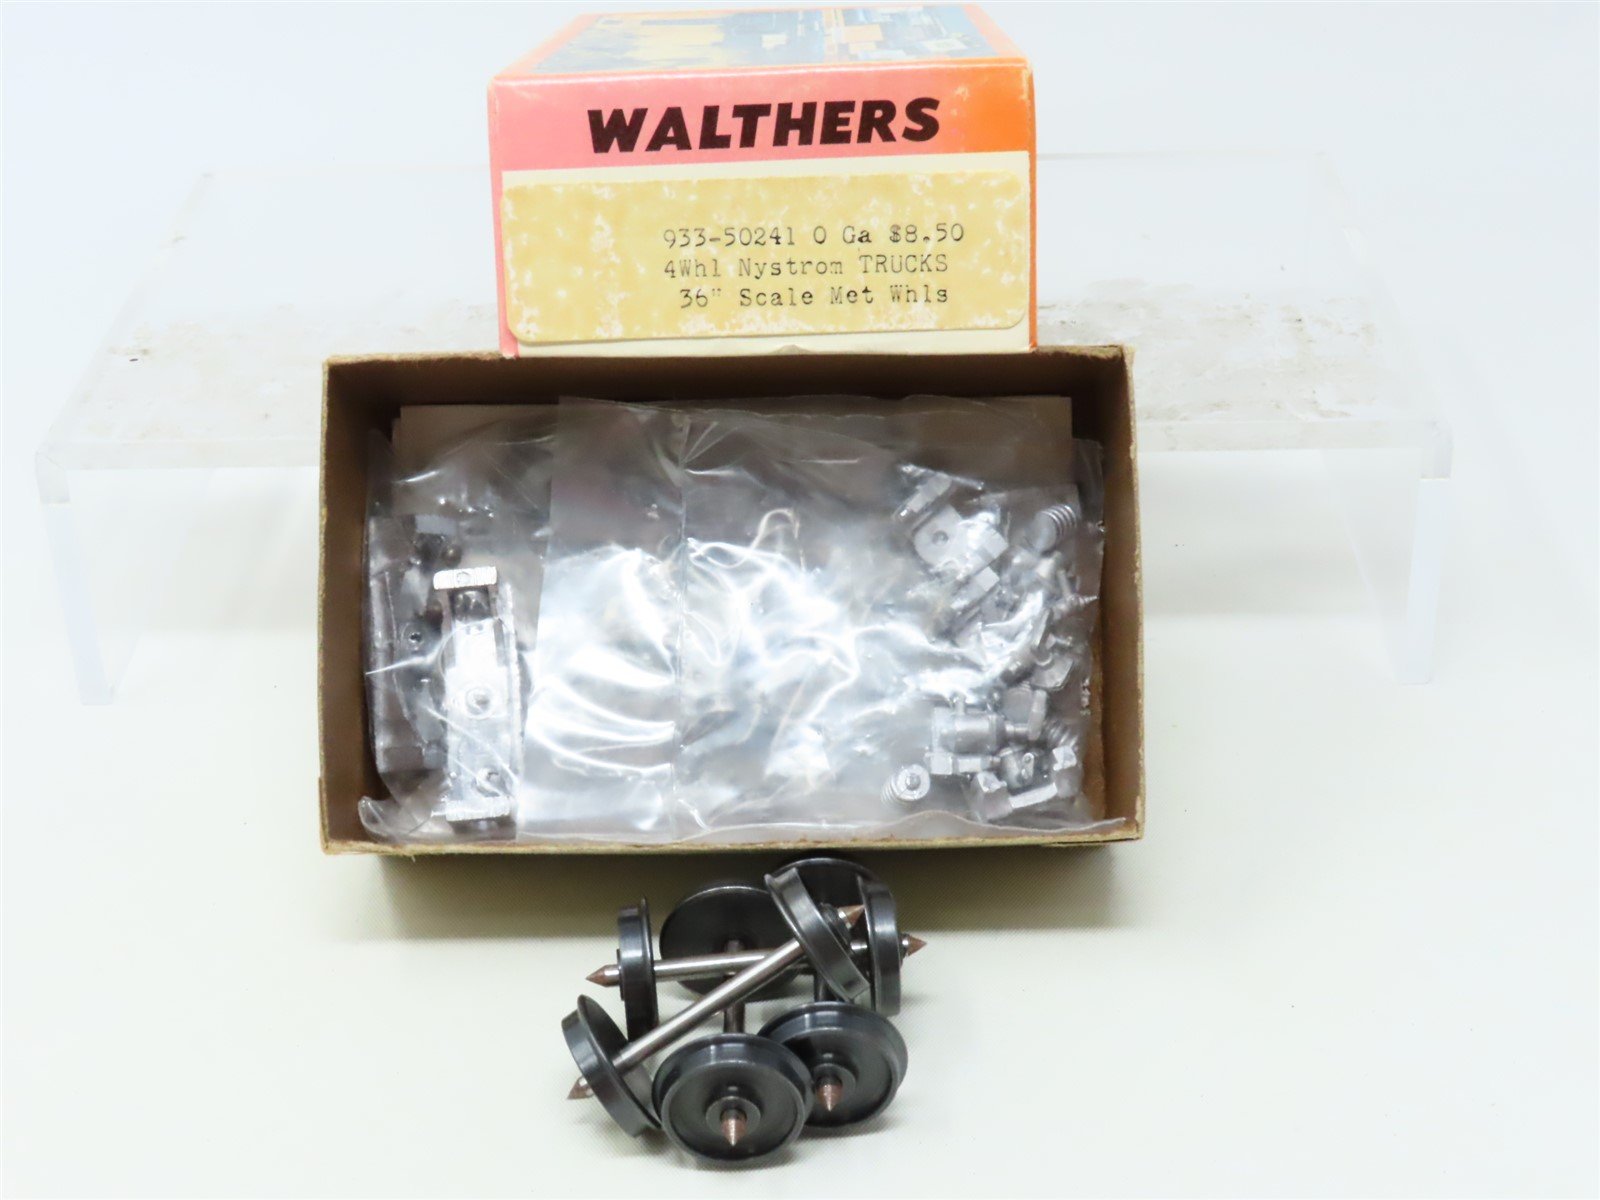 O 1/48 Scale Walthers Kit #933-50241 4 Wheel Nystrom 36" Trucks